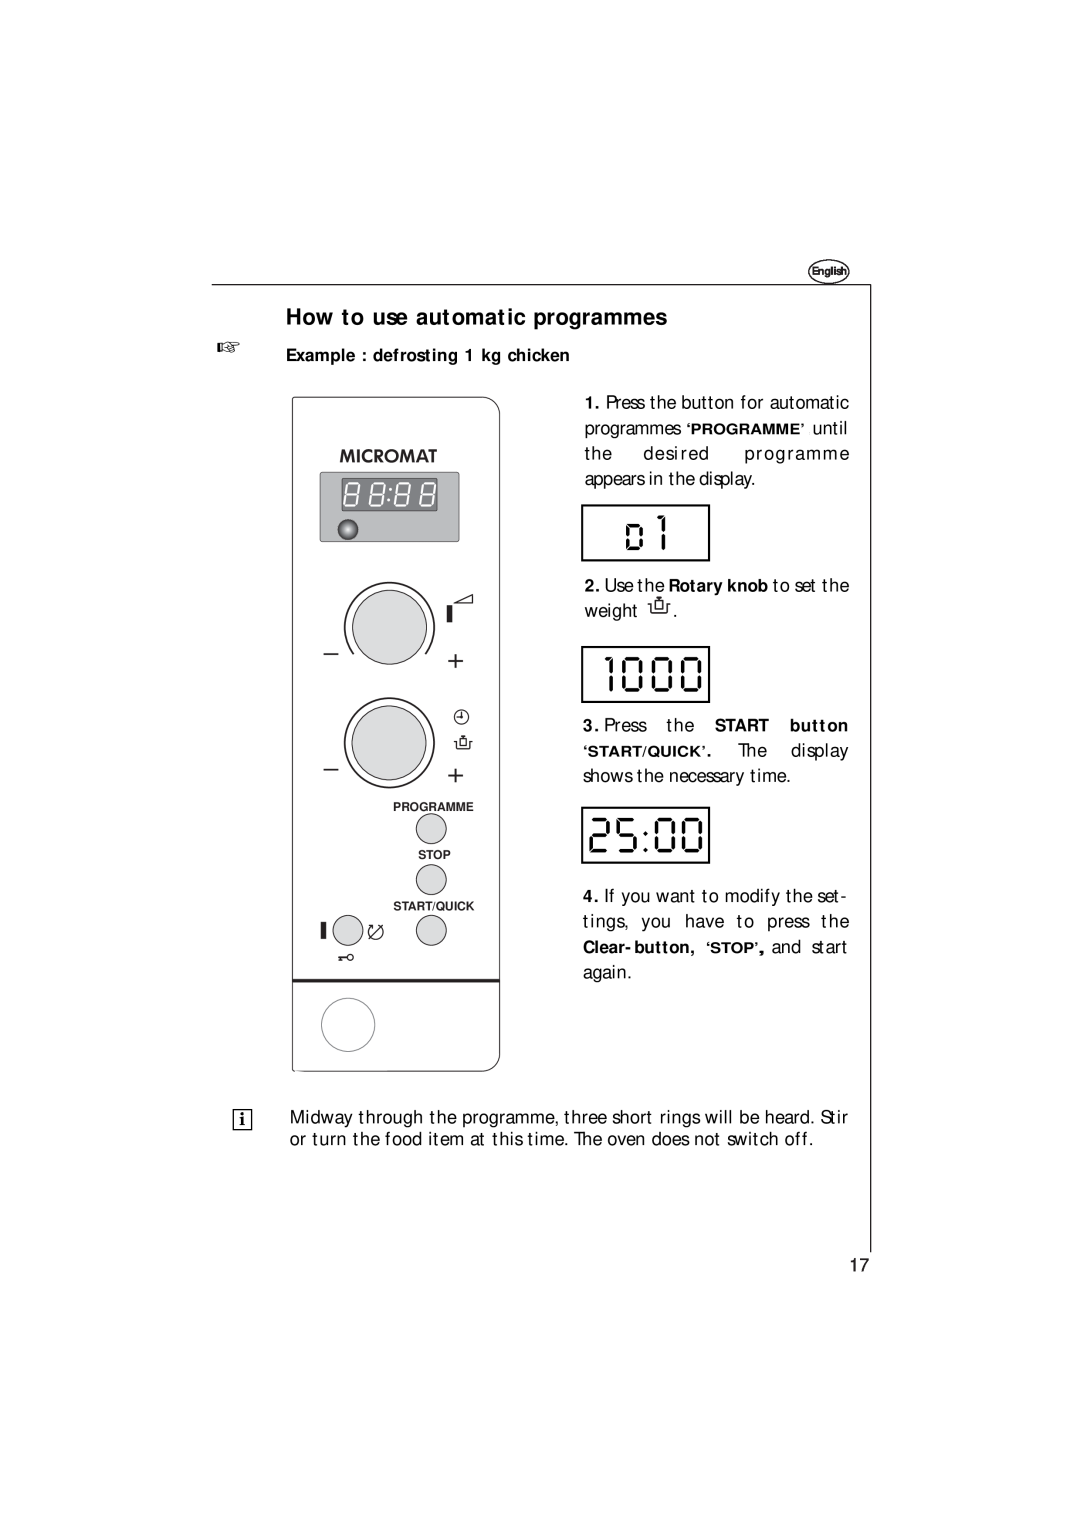 AEG 153 E manual How to use automatic programmes, Example defrosting 1 kg chicken, Press the START button 